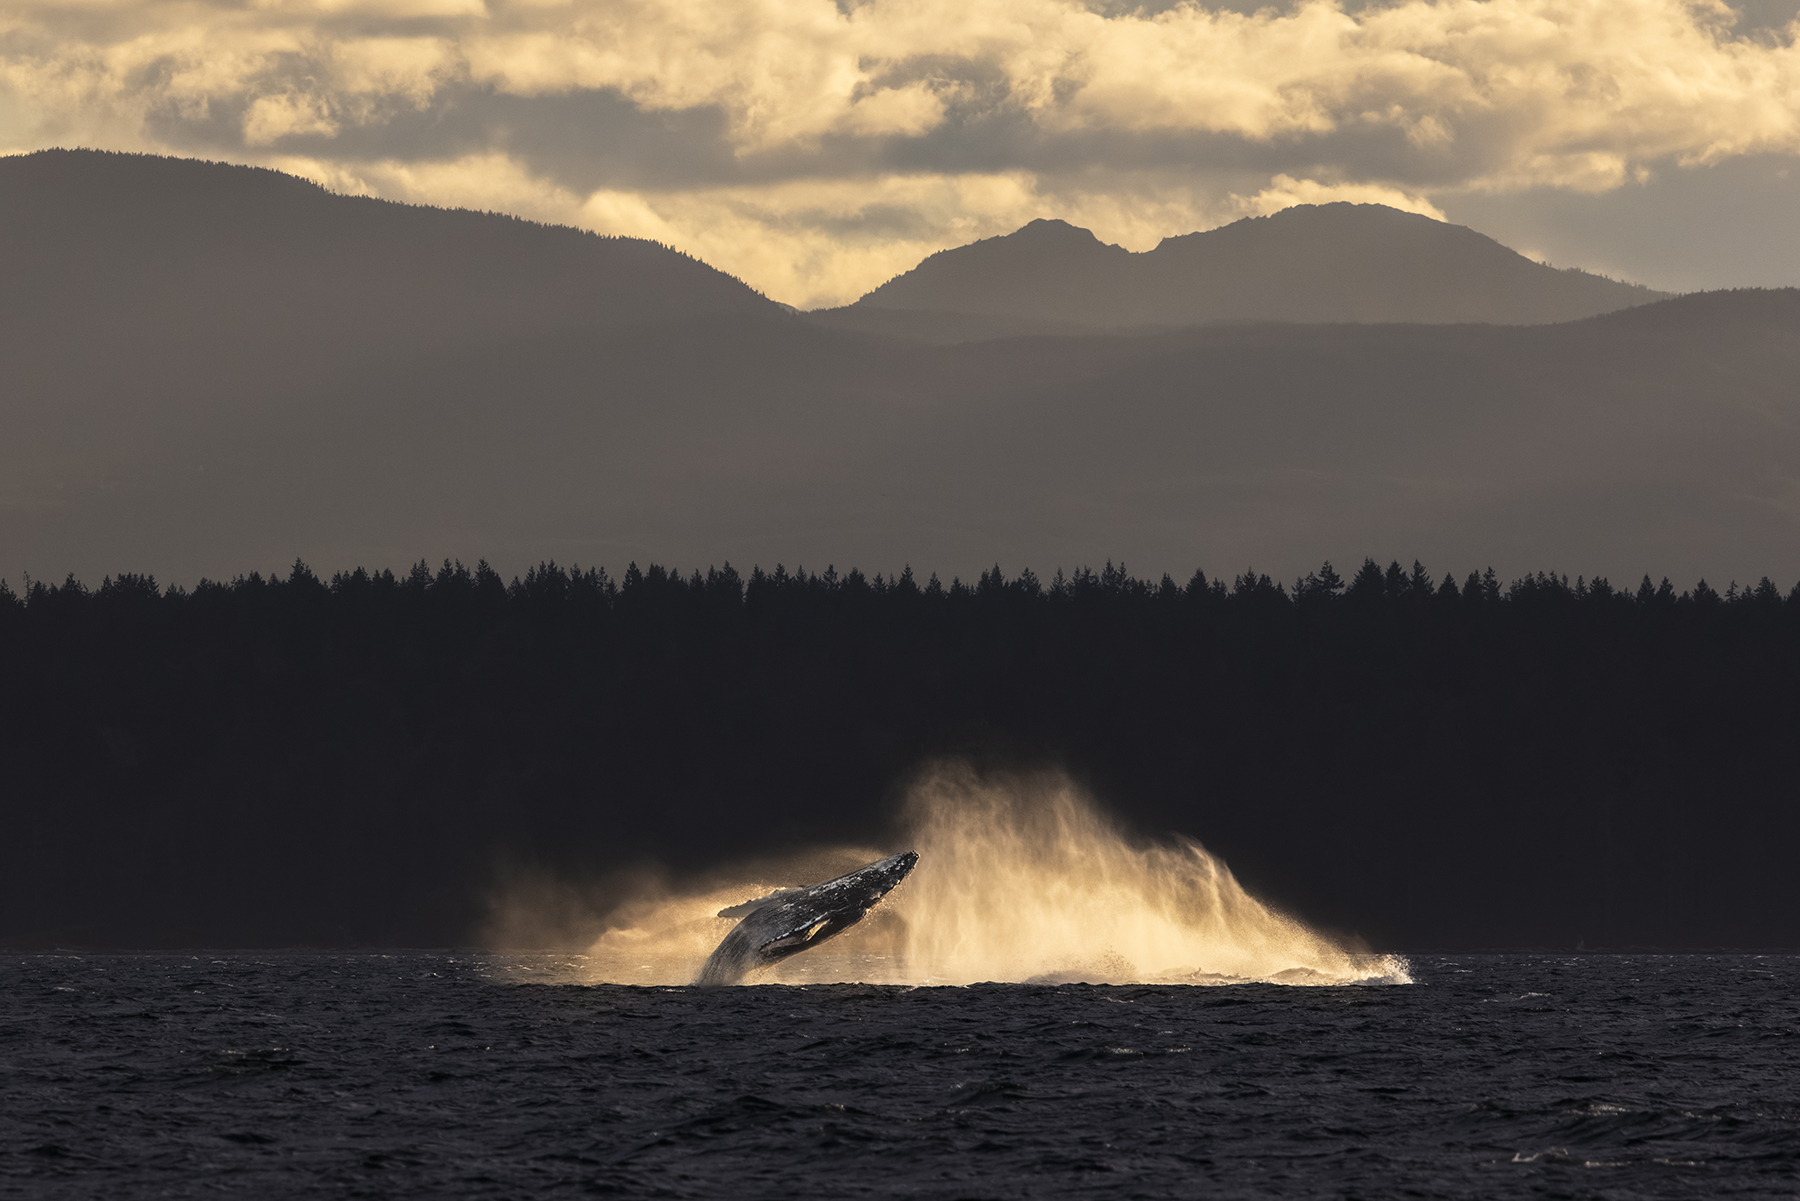 Humpback whale breaching in the sunset.